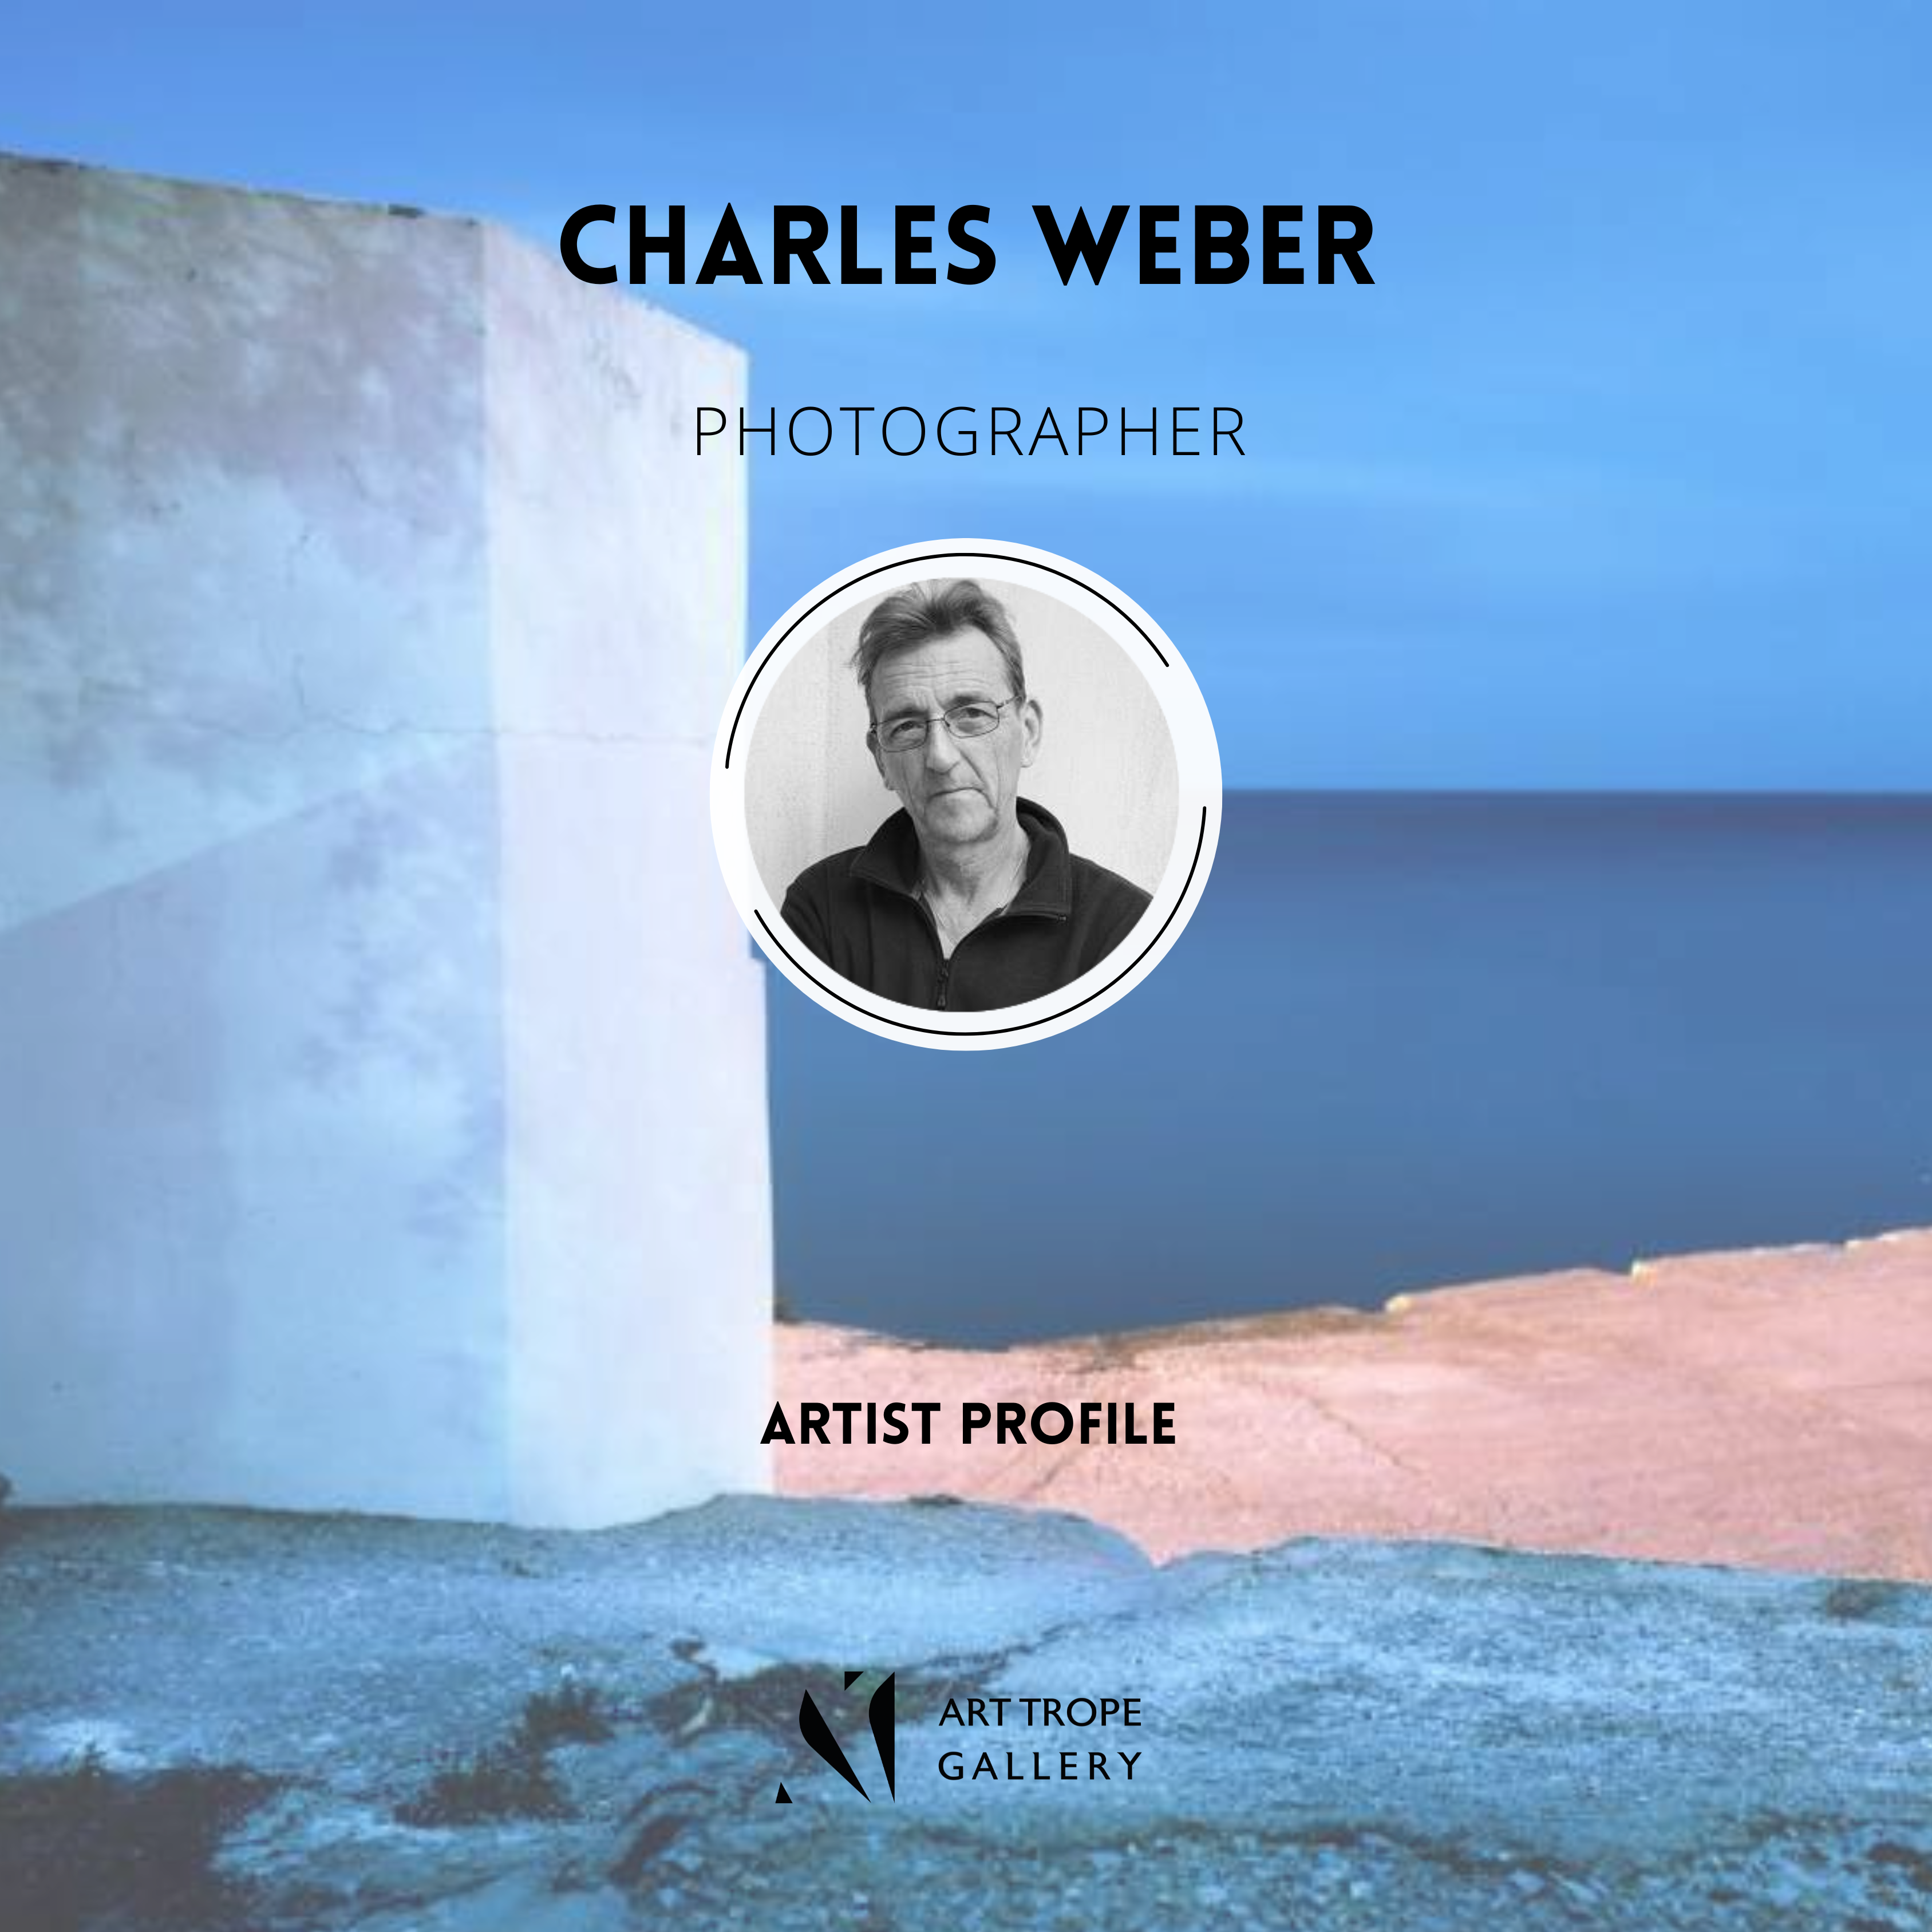 Art Trope Gallery features Photographer Charles Weber in a dedicated article!